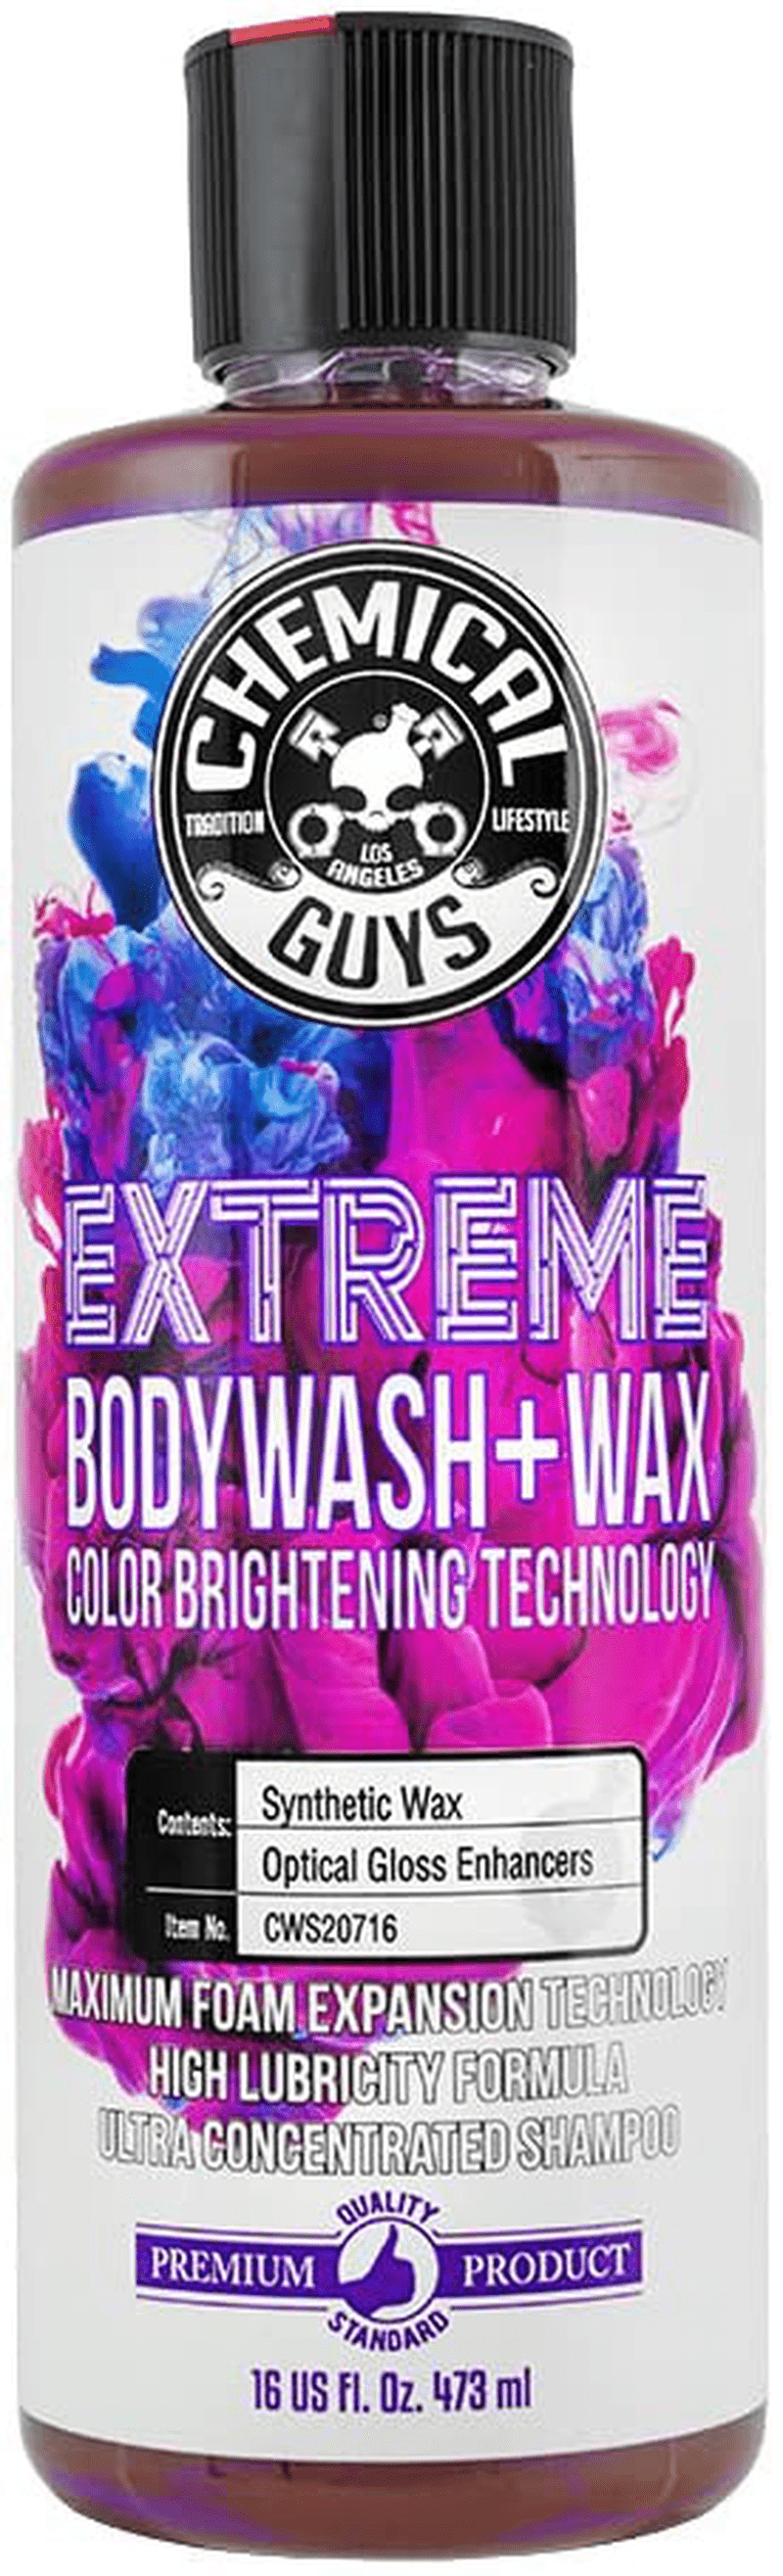 Chemical Guys CWS20764 Extreme Bodywash & Wax Foaming Car Wash Soap (Works with Foam Cannons, Foam Guns or Bucket Washes), 64 oz., Grape Scent  ‎Chemical Guys Extreme Bodywash 16 oz 